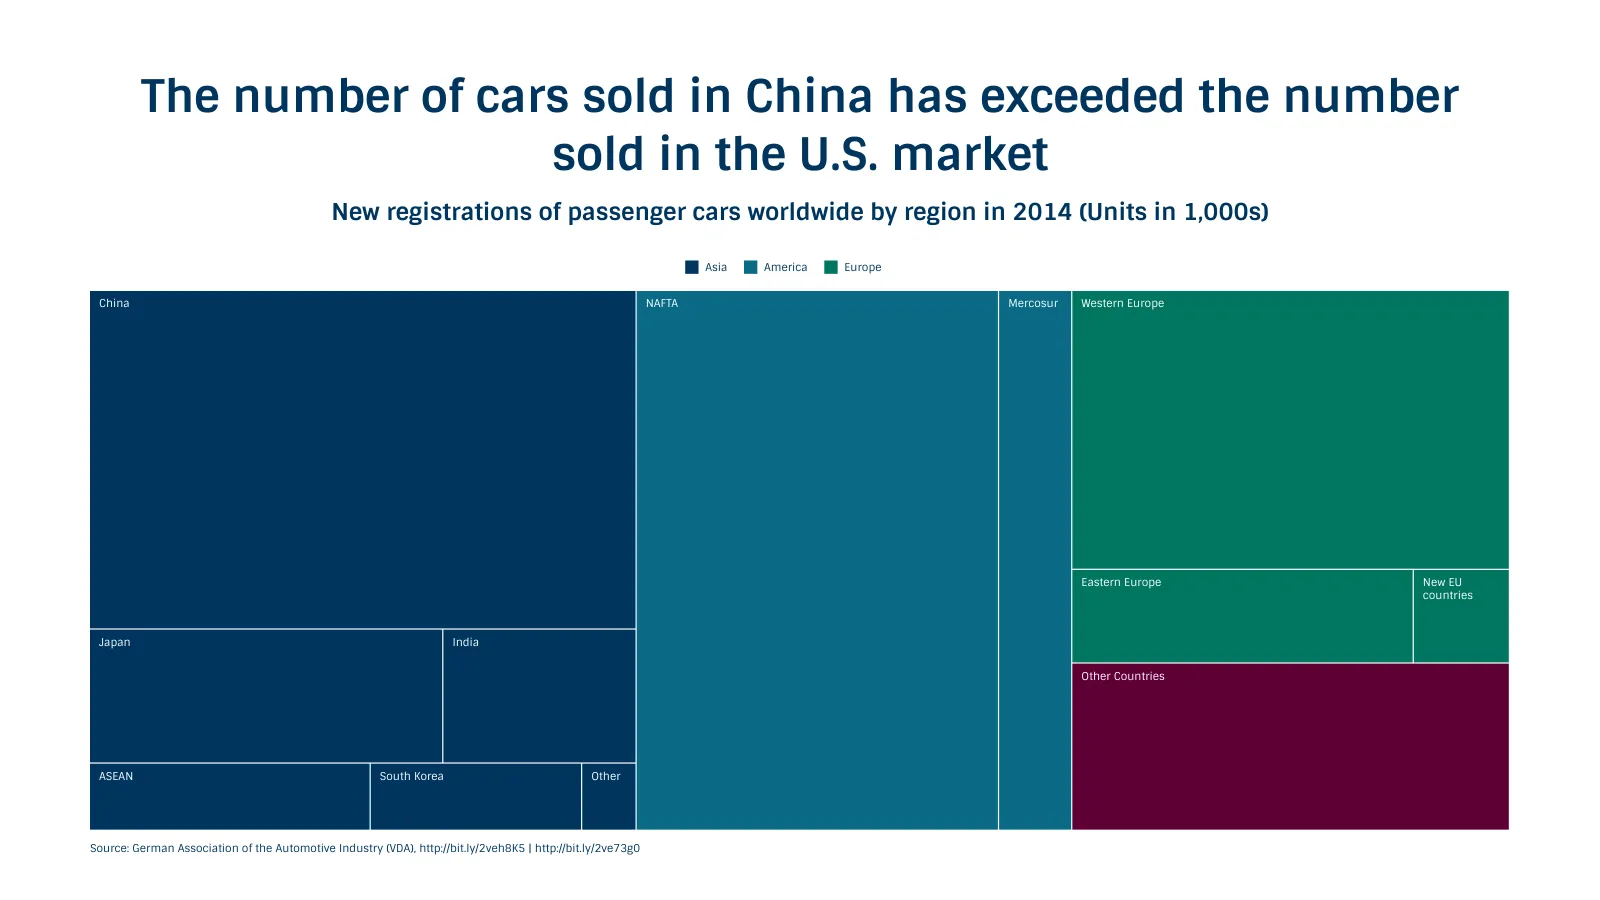 Treemap example: The number of cars sold in China has exceeded the number sold in the U.S. market